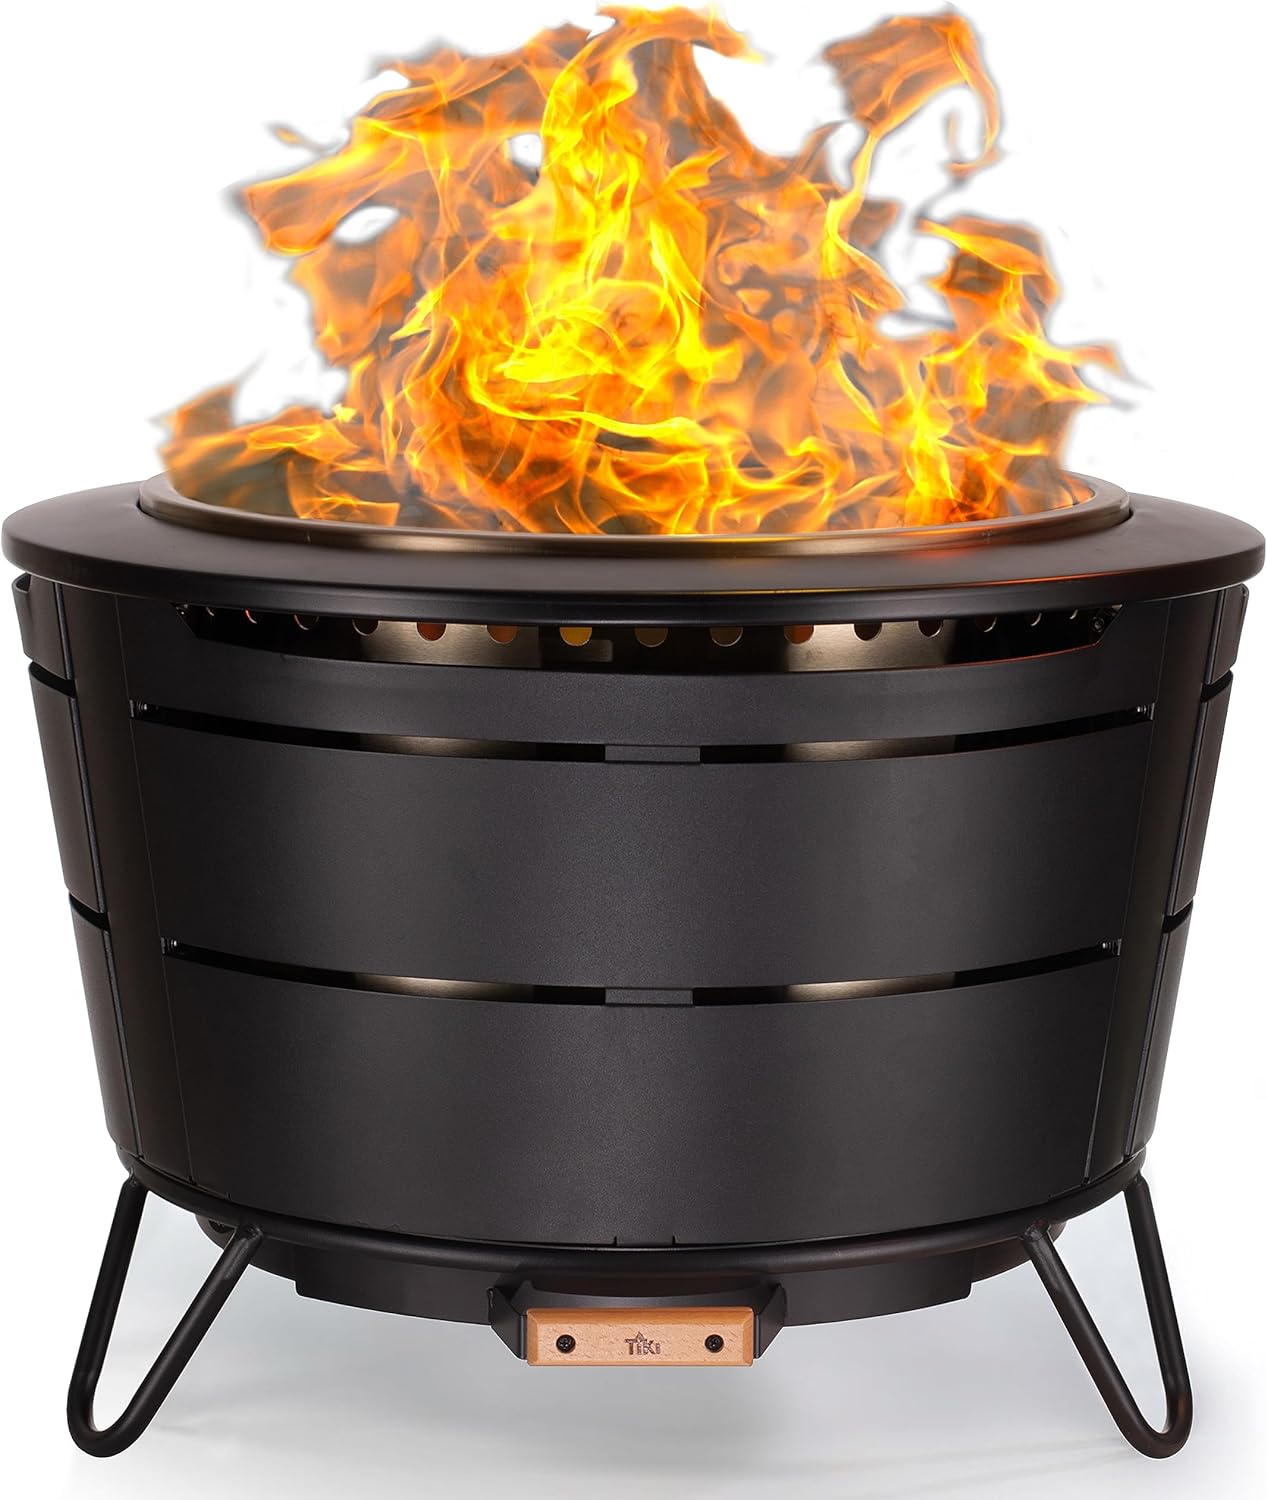 TIKI Brand Reunion Smokeless Fire Pit | Large Wood Burning Outdoor Fire Pit, Great for Large Gatherings - Includes Starter Pack, Modern Design with Removable Ash Pan, 27.5x27.5x20 in, Black